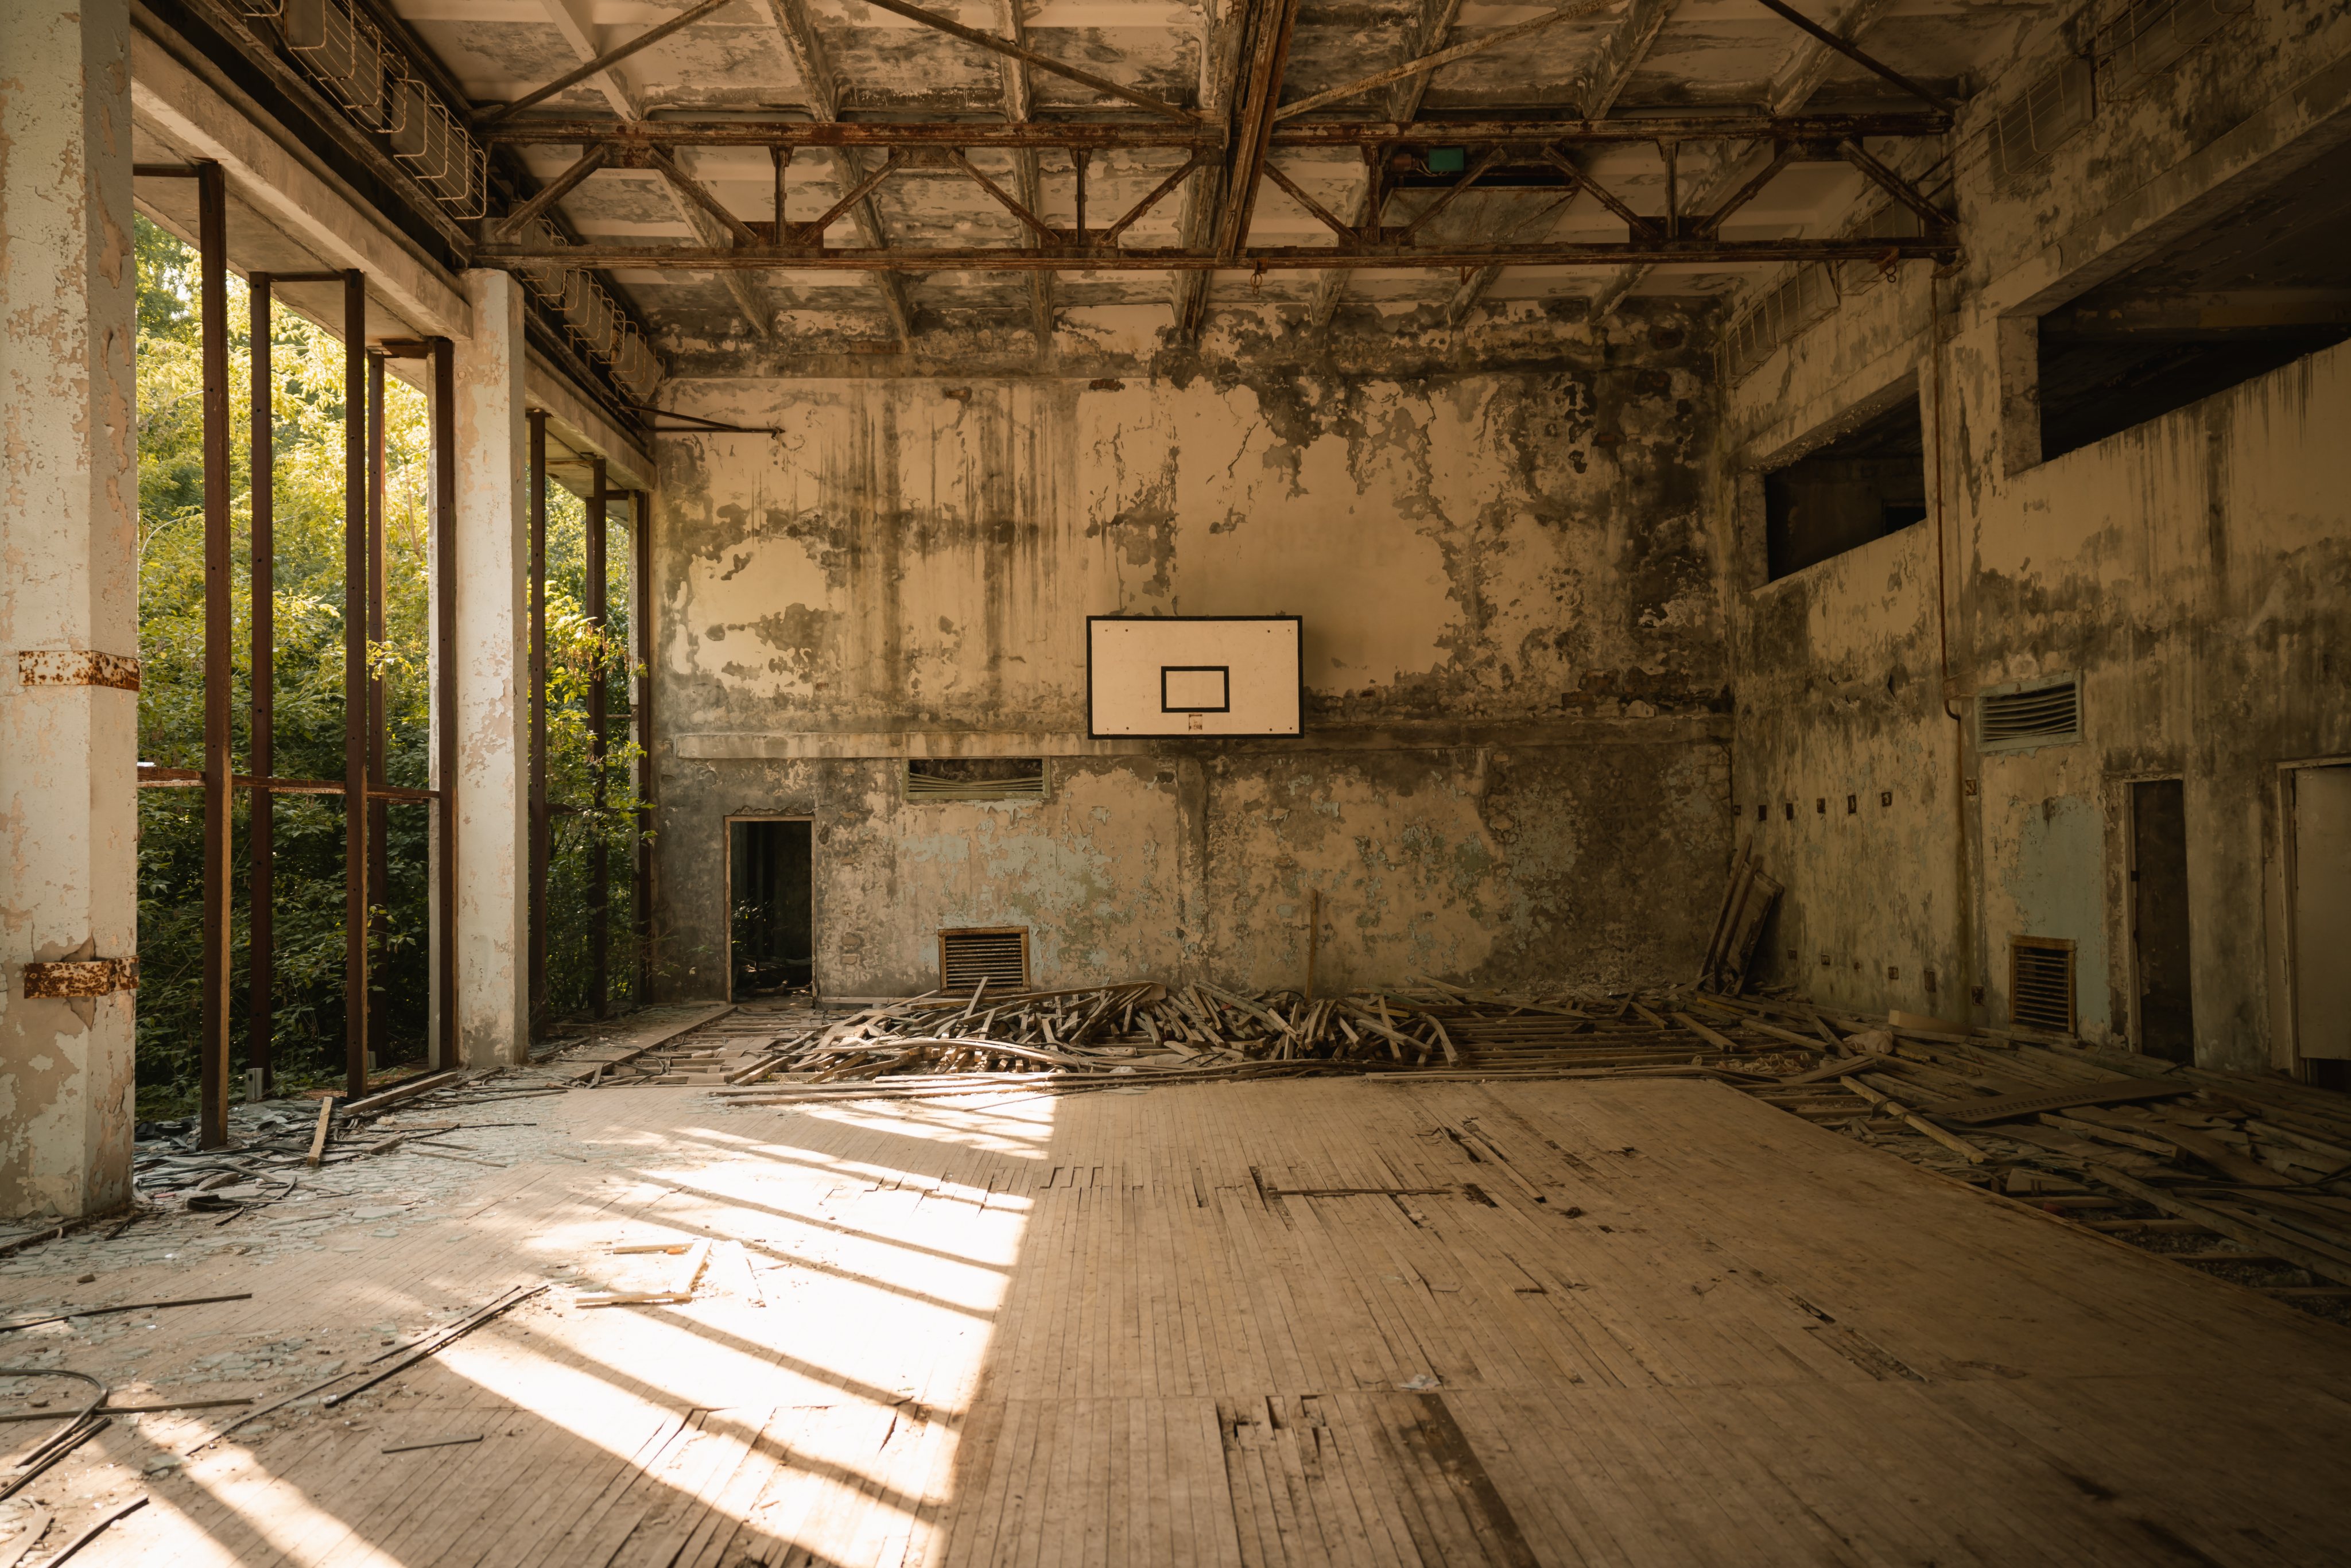 Basketball court at Azure Swimming Pool and Sport Center - Pripyat, Chernobyl Exclusion Zone, Ukraine